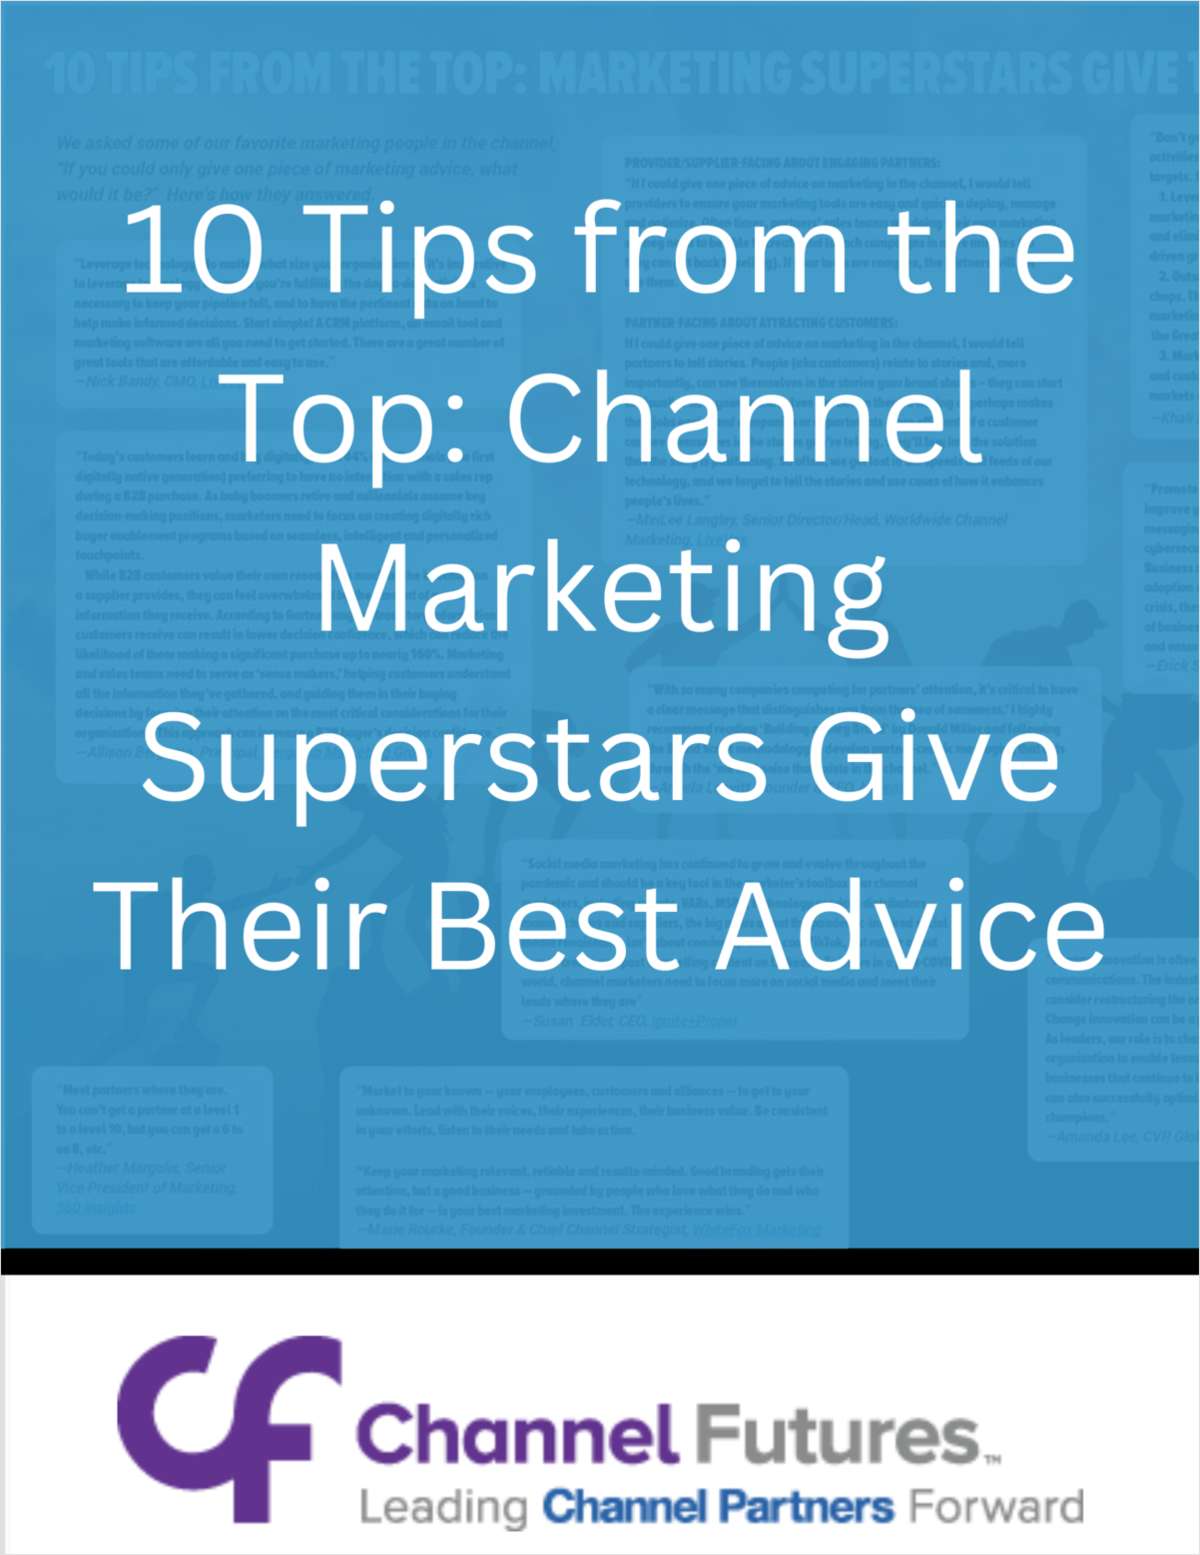 'If you could only give one piece of marketing advice, what would it be?' - 10 Tips from Marketing Superstars